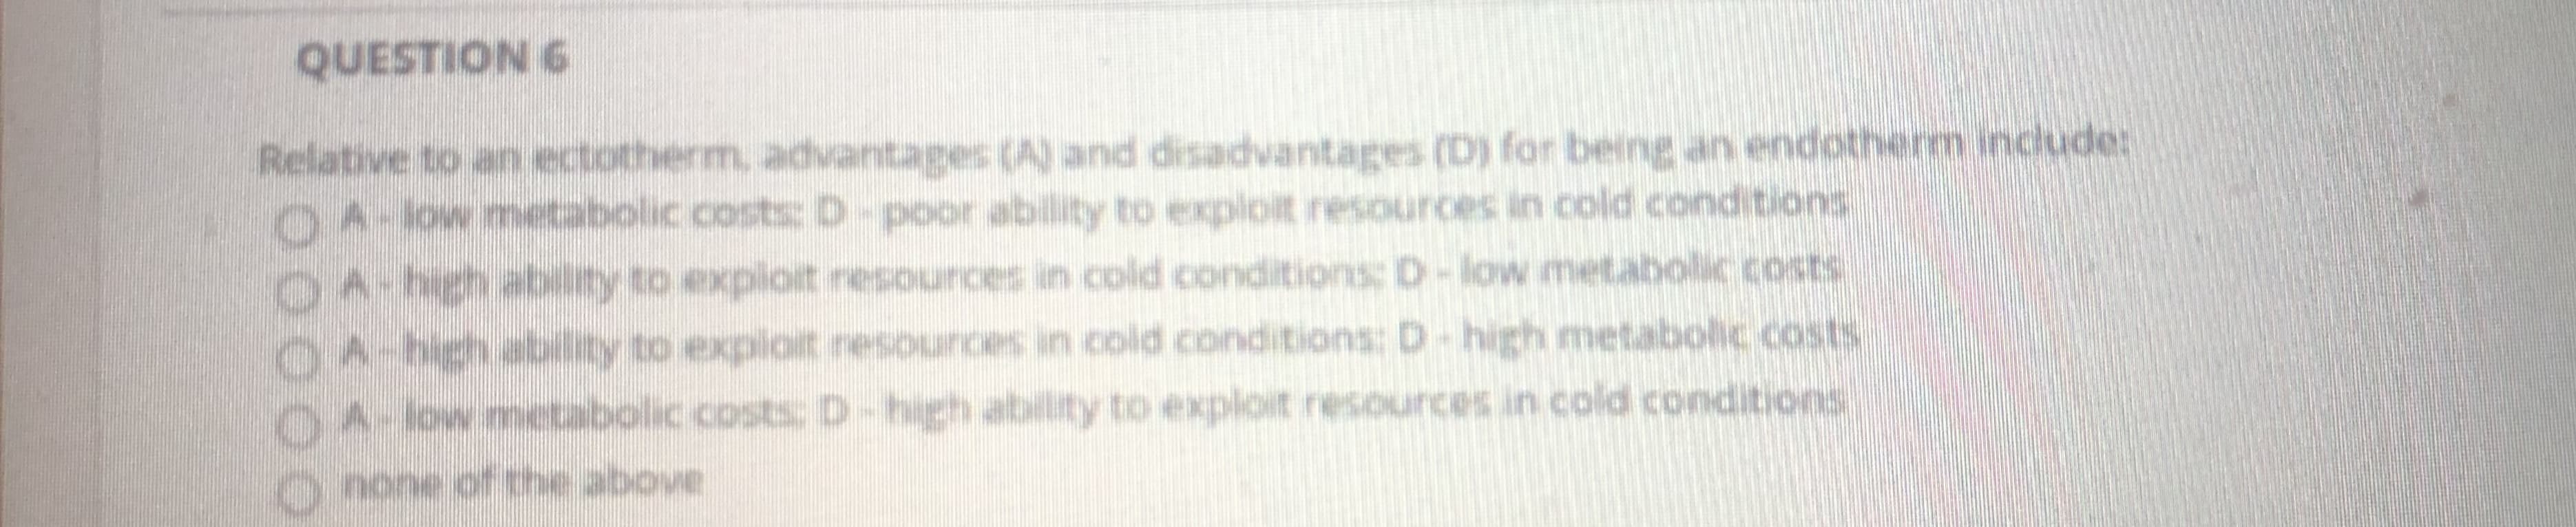 QUESTION 6
Relative to an ectotherm, advantages (A) and disadvantages (D) for being an endothern indude:
OA-low metabolic costs: D-poor ability to exploit resources in cold conditions
OA-hghability to exploit resources in cold conditions:D-low metabollic costs
OA-bghability to exploit nesounces in cold conditions: D-high metabolic .costs
O4-owmecabolic costs: D-high ability to exploit resources in cold conditions
o none of the above
